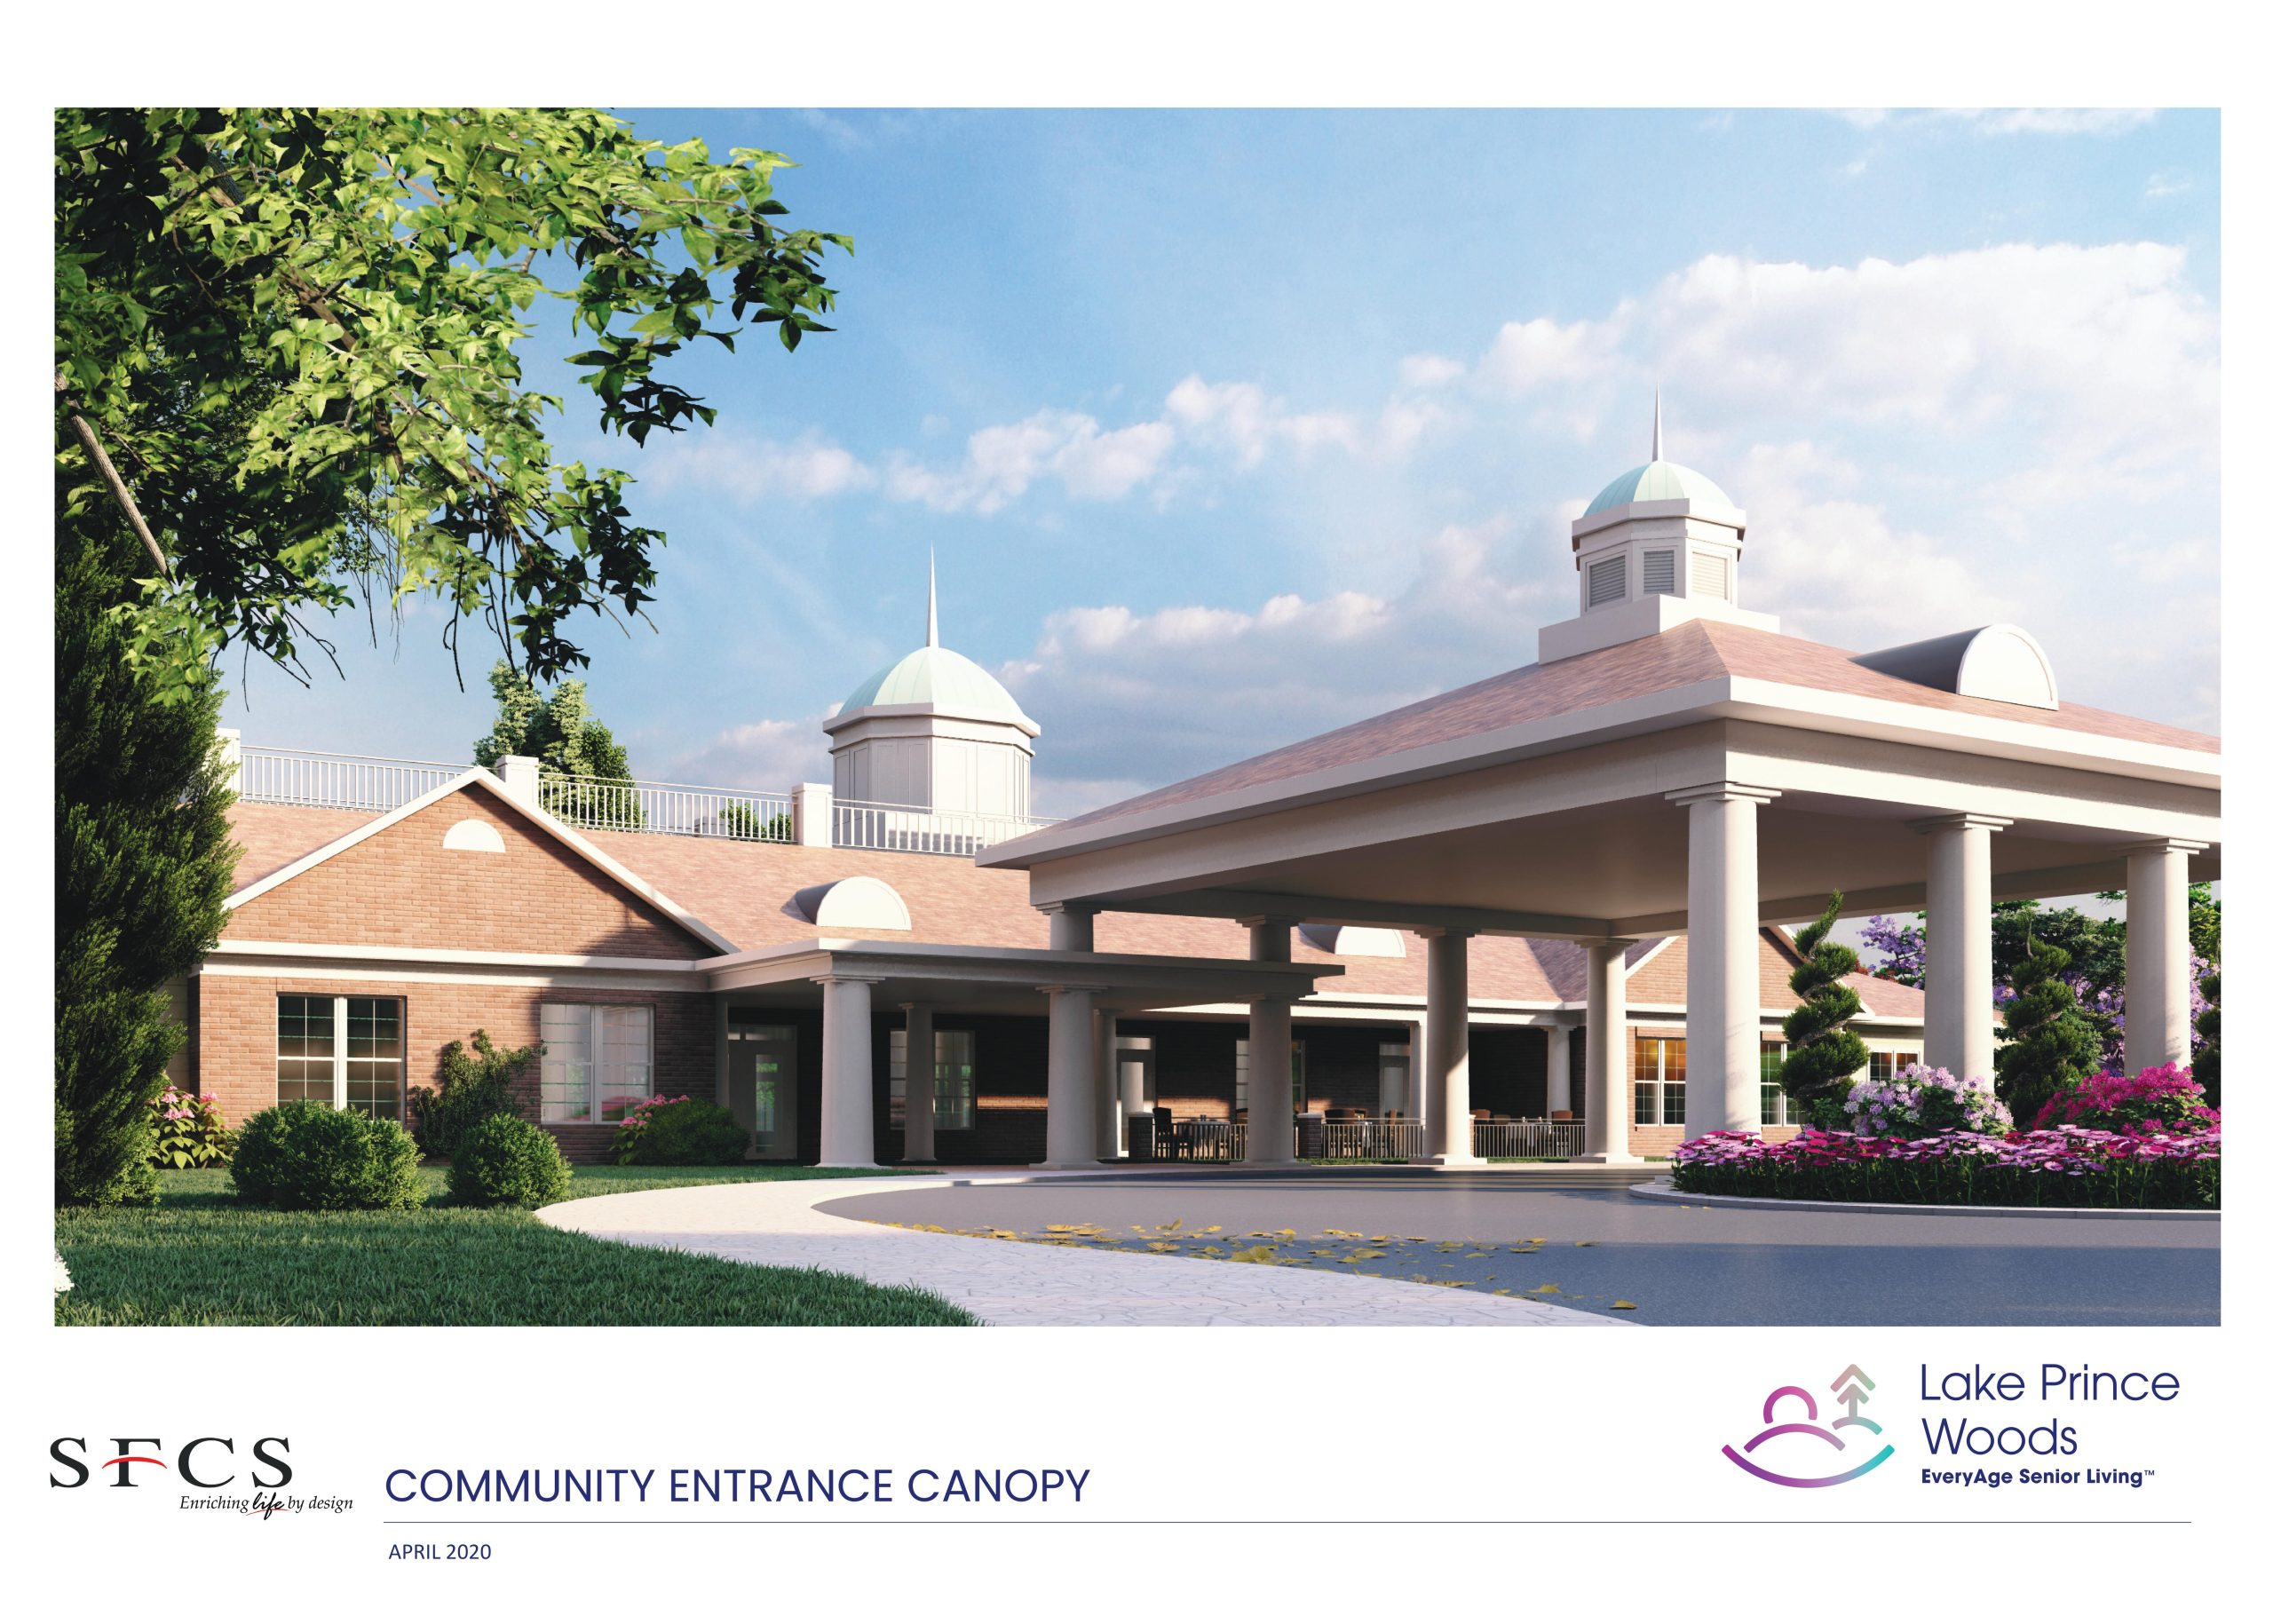 lake prince woods rendering of proposed new entrance with porte cochere